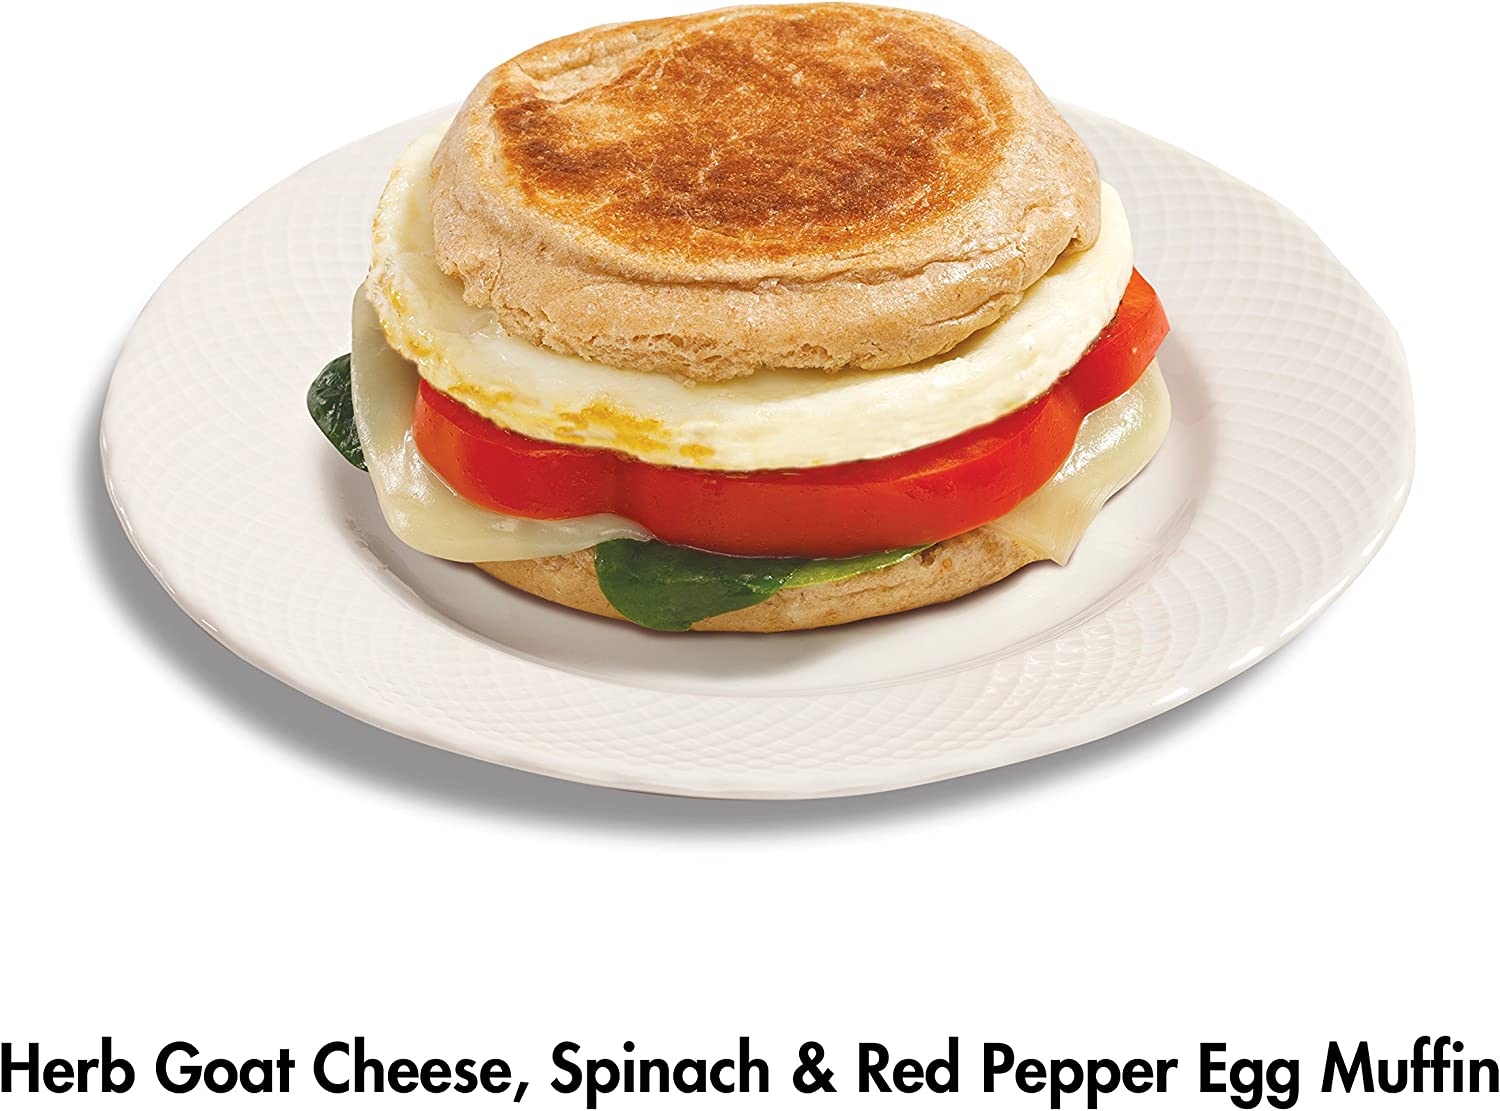 Hamilton Beach Breakfast Sandwich Maker with Egg Cooker Ring, Customize  Ingredients, Red, 25476